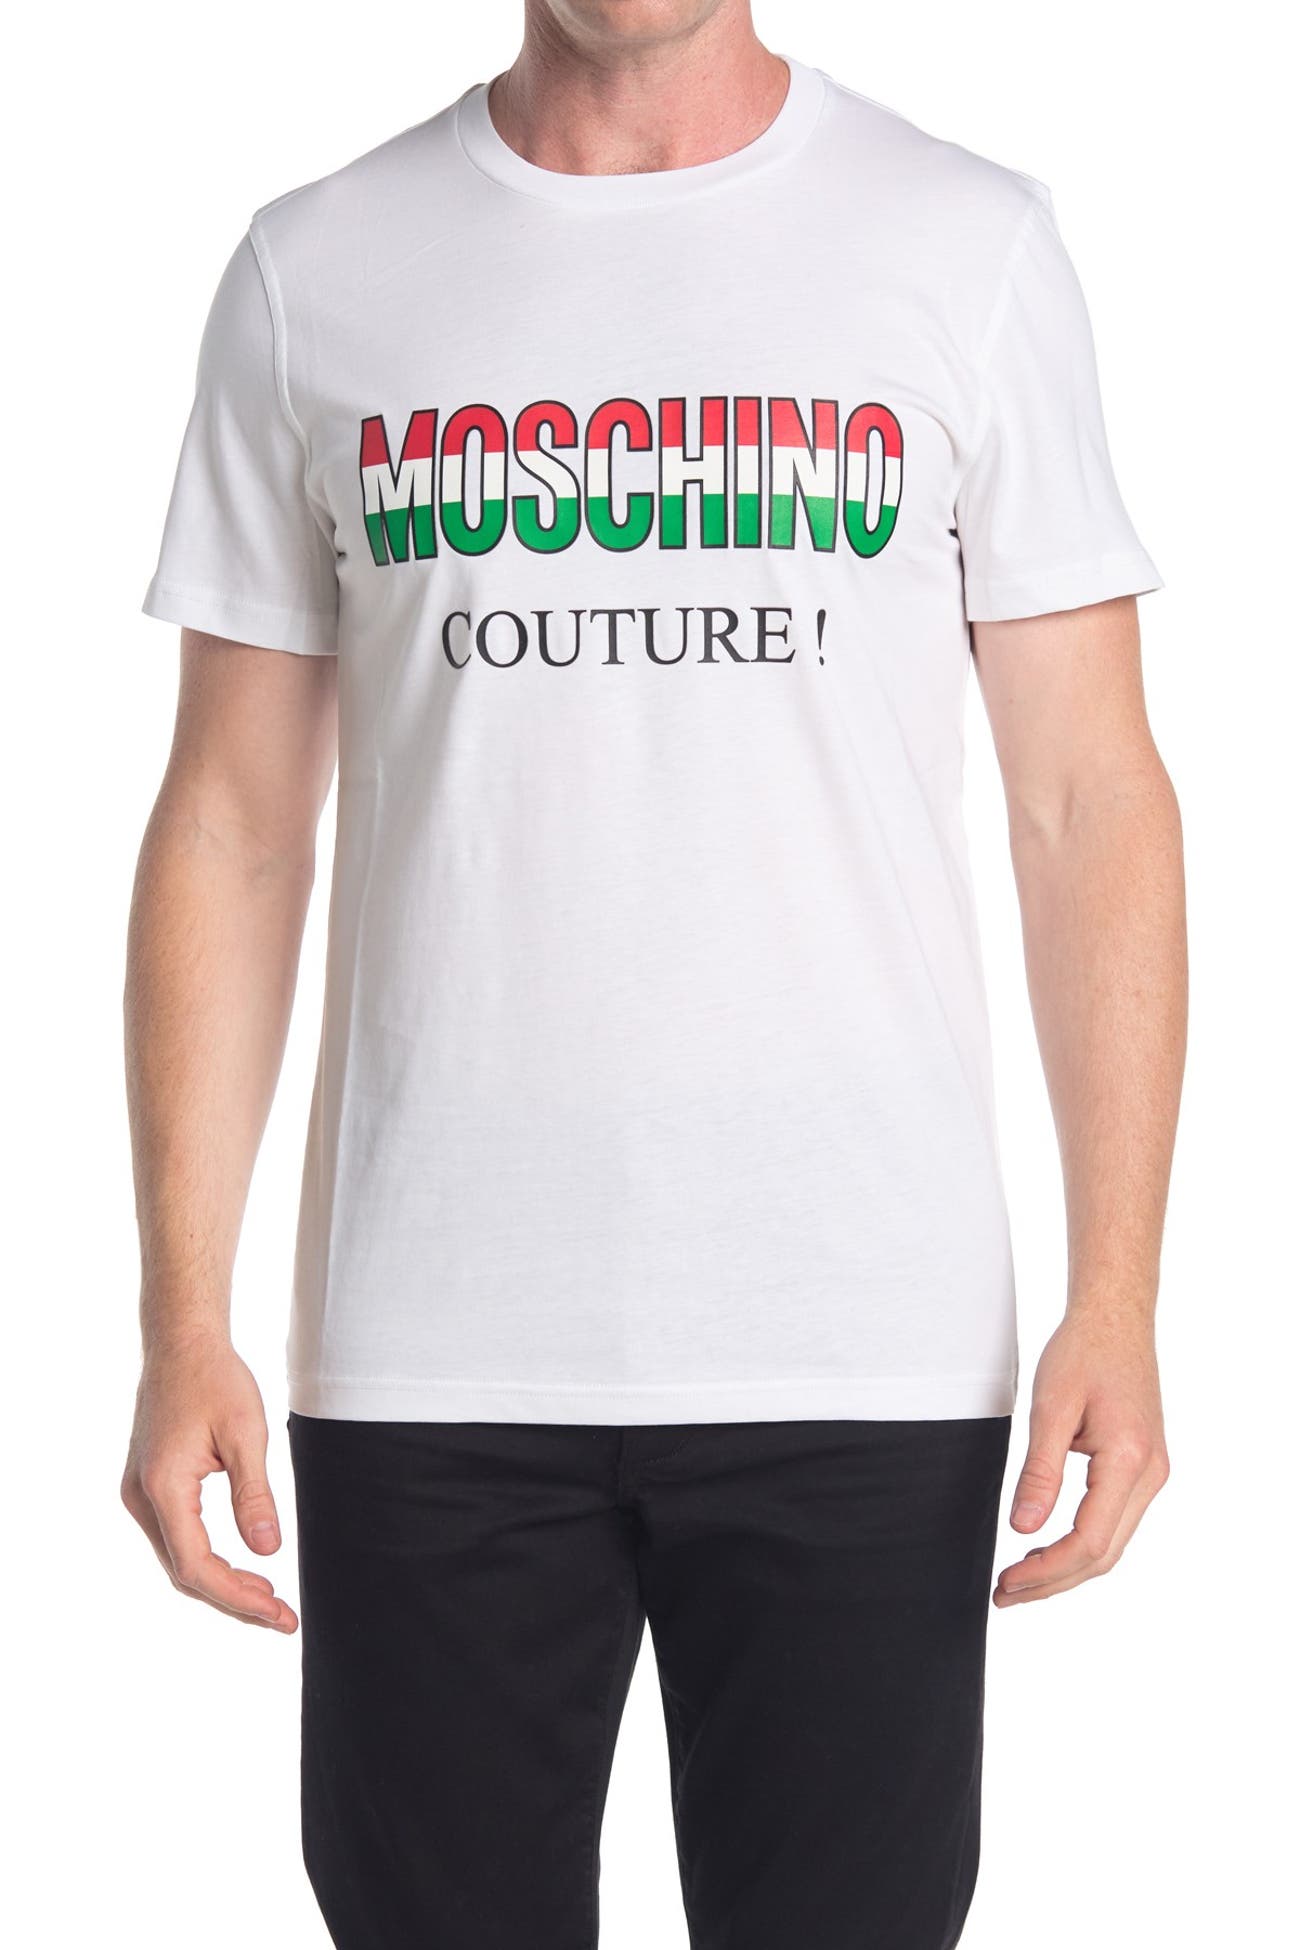 MOSCHINO | Couture! T-Shirt | Nordstrom Rack